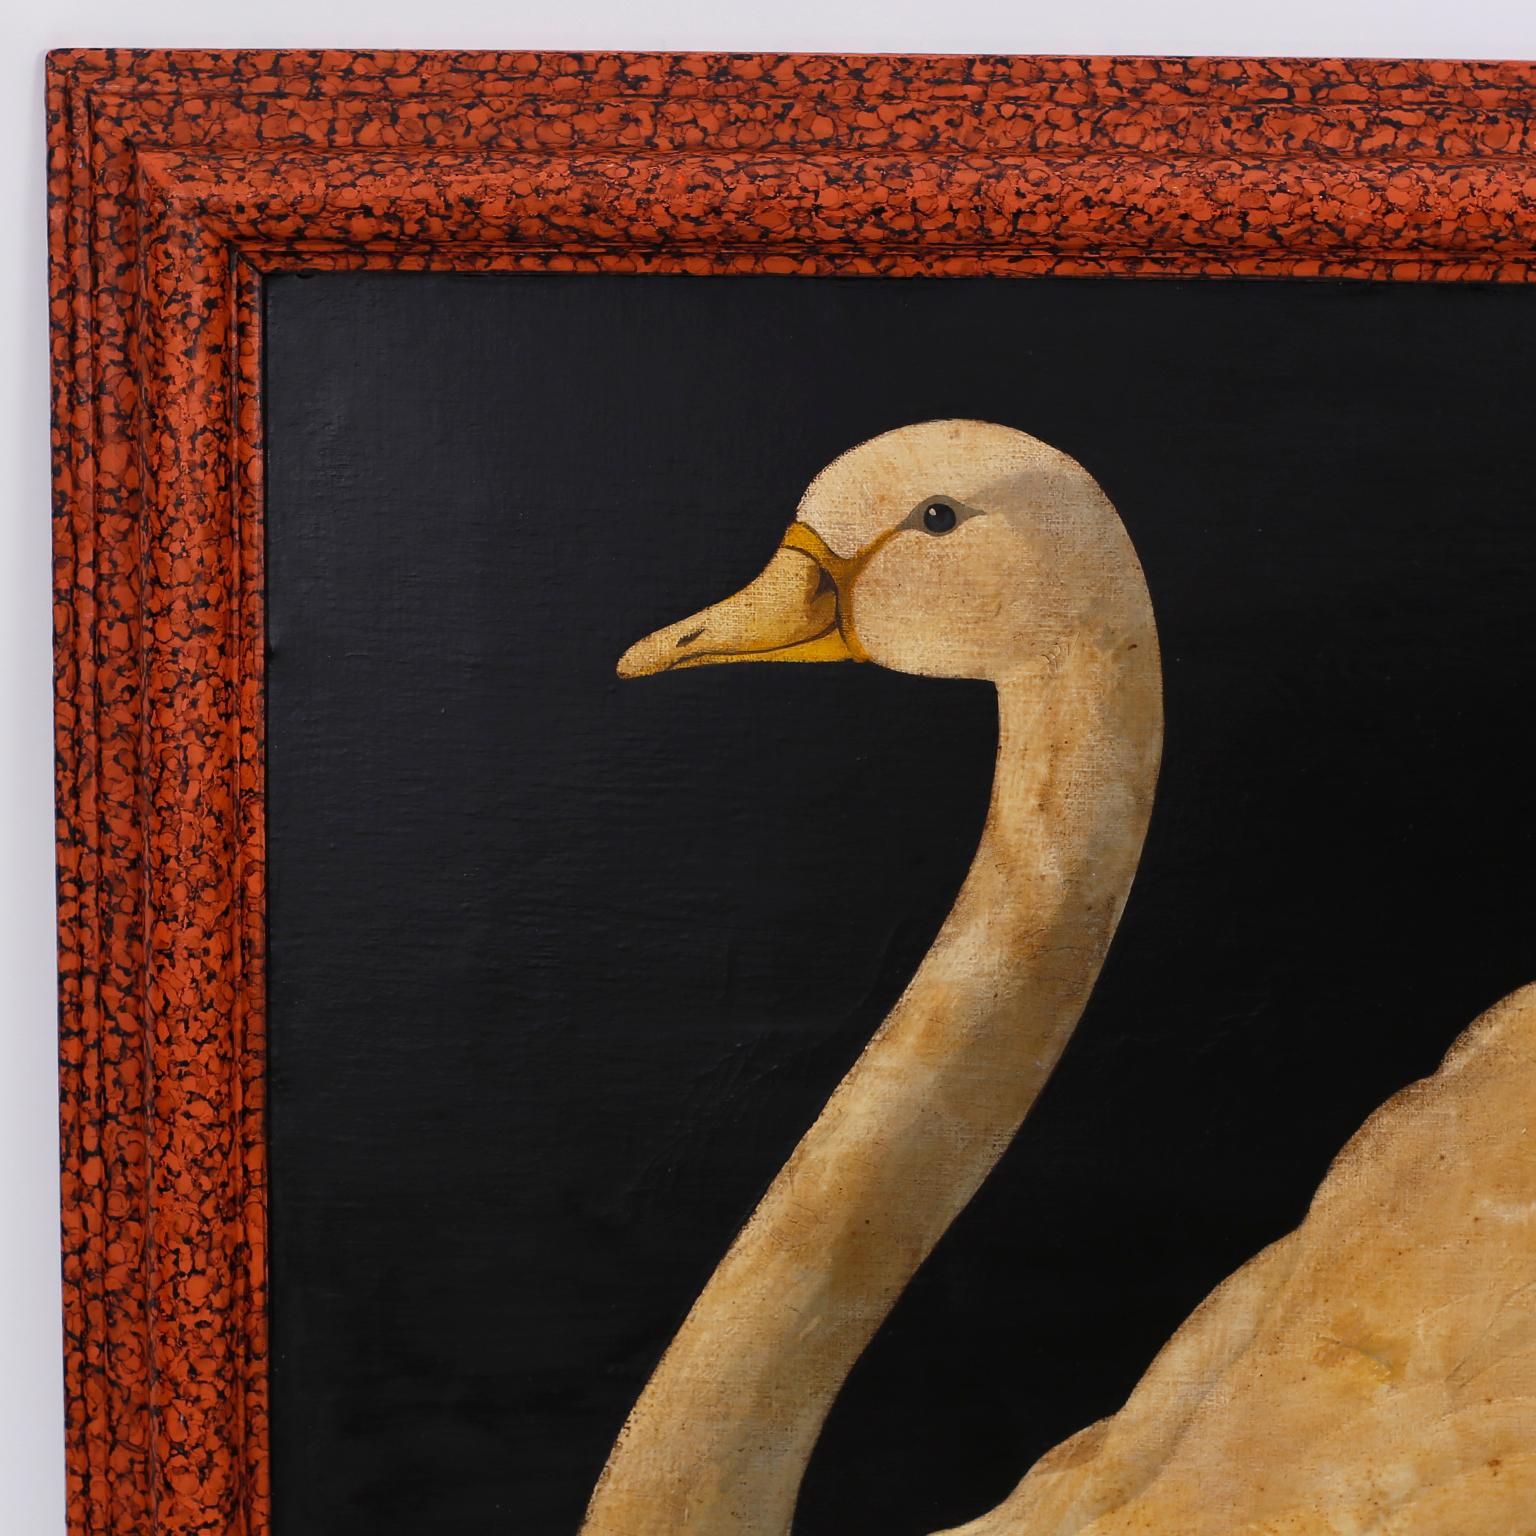 Oil painting on canvas of a graceful swan by William Skilling, executed in a tongue-in-cheek Victorian parlour painting style typical of the artist, with contrived aging and distressed finish, some evidence of old professional repair. Signed